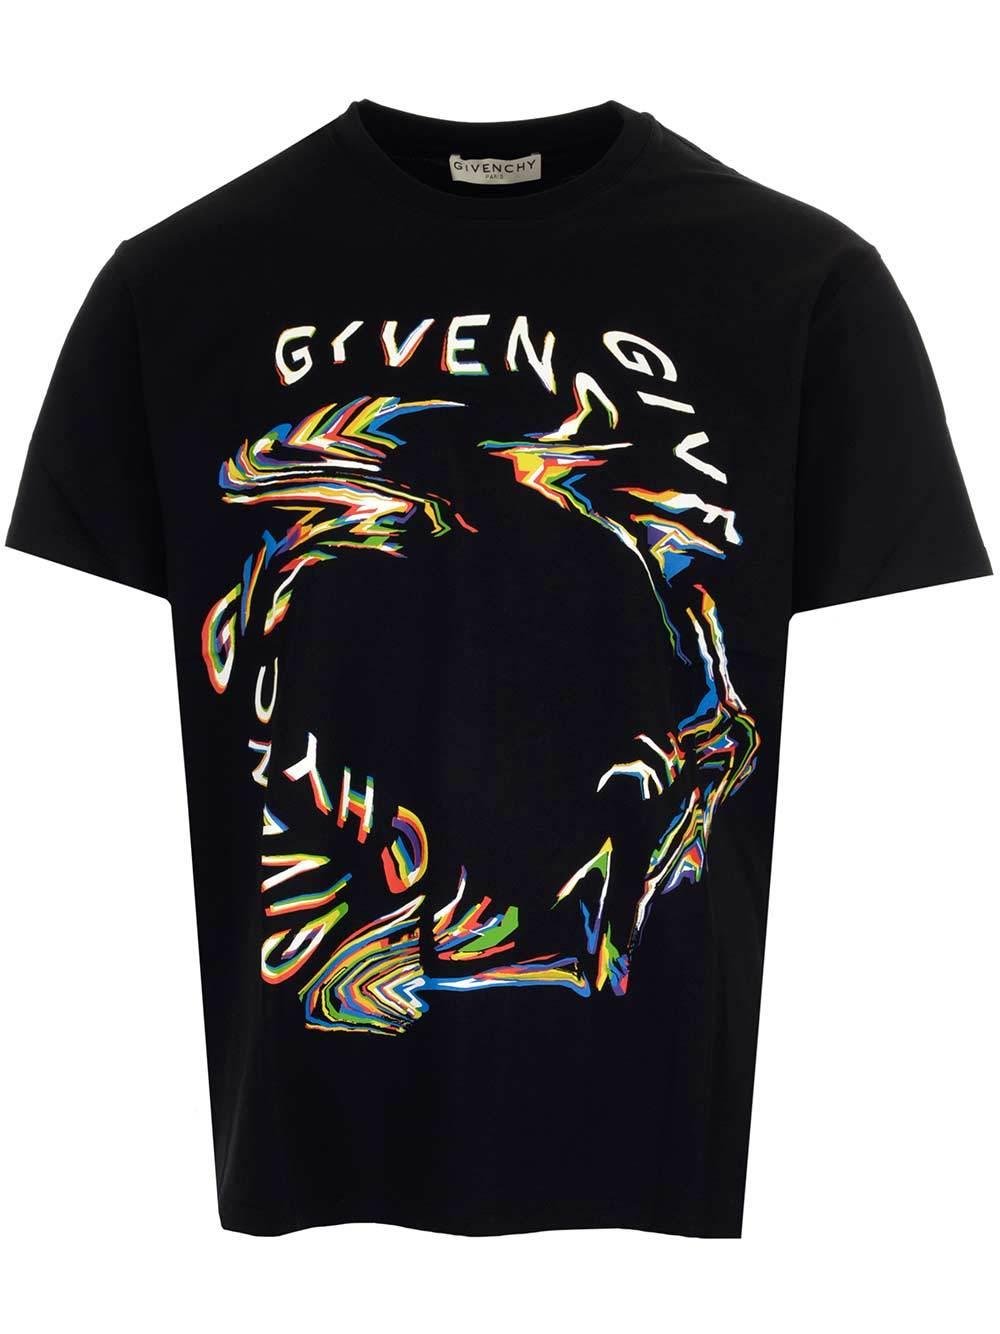 Givenchy Cotton Glitch Printed T-shirt in Black for Men - Lyst